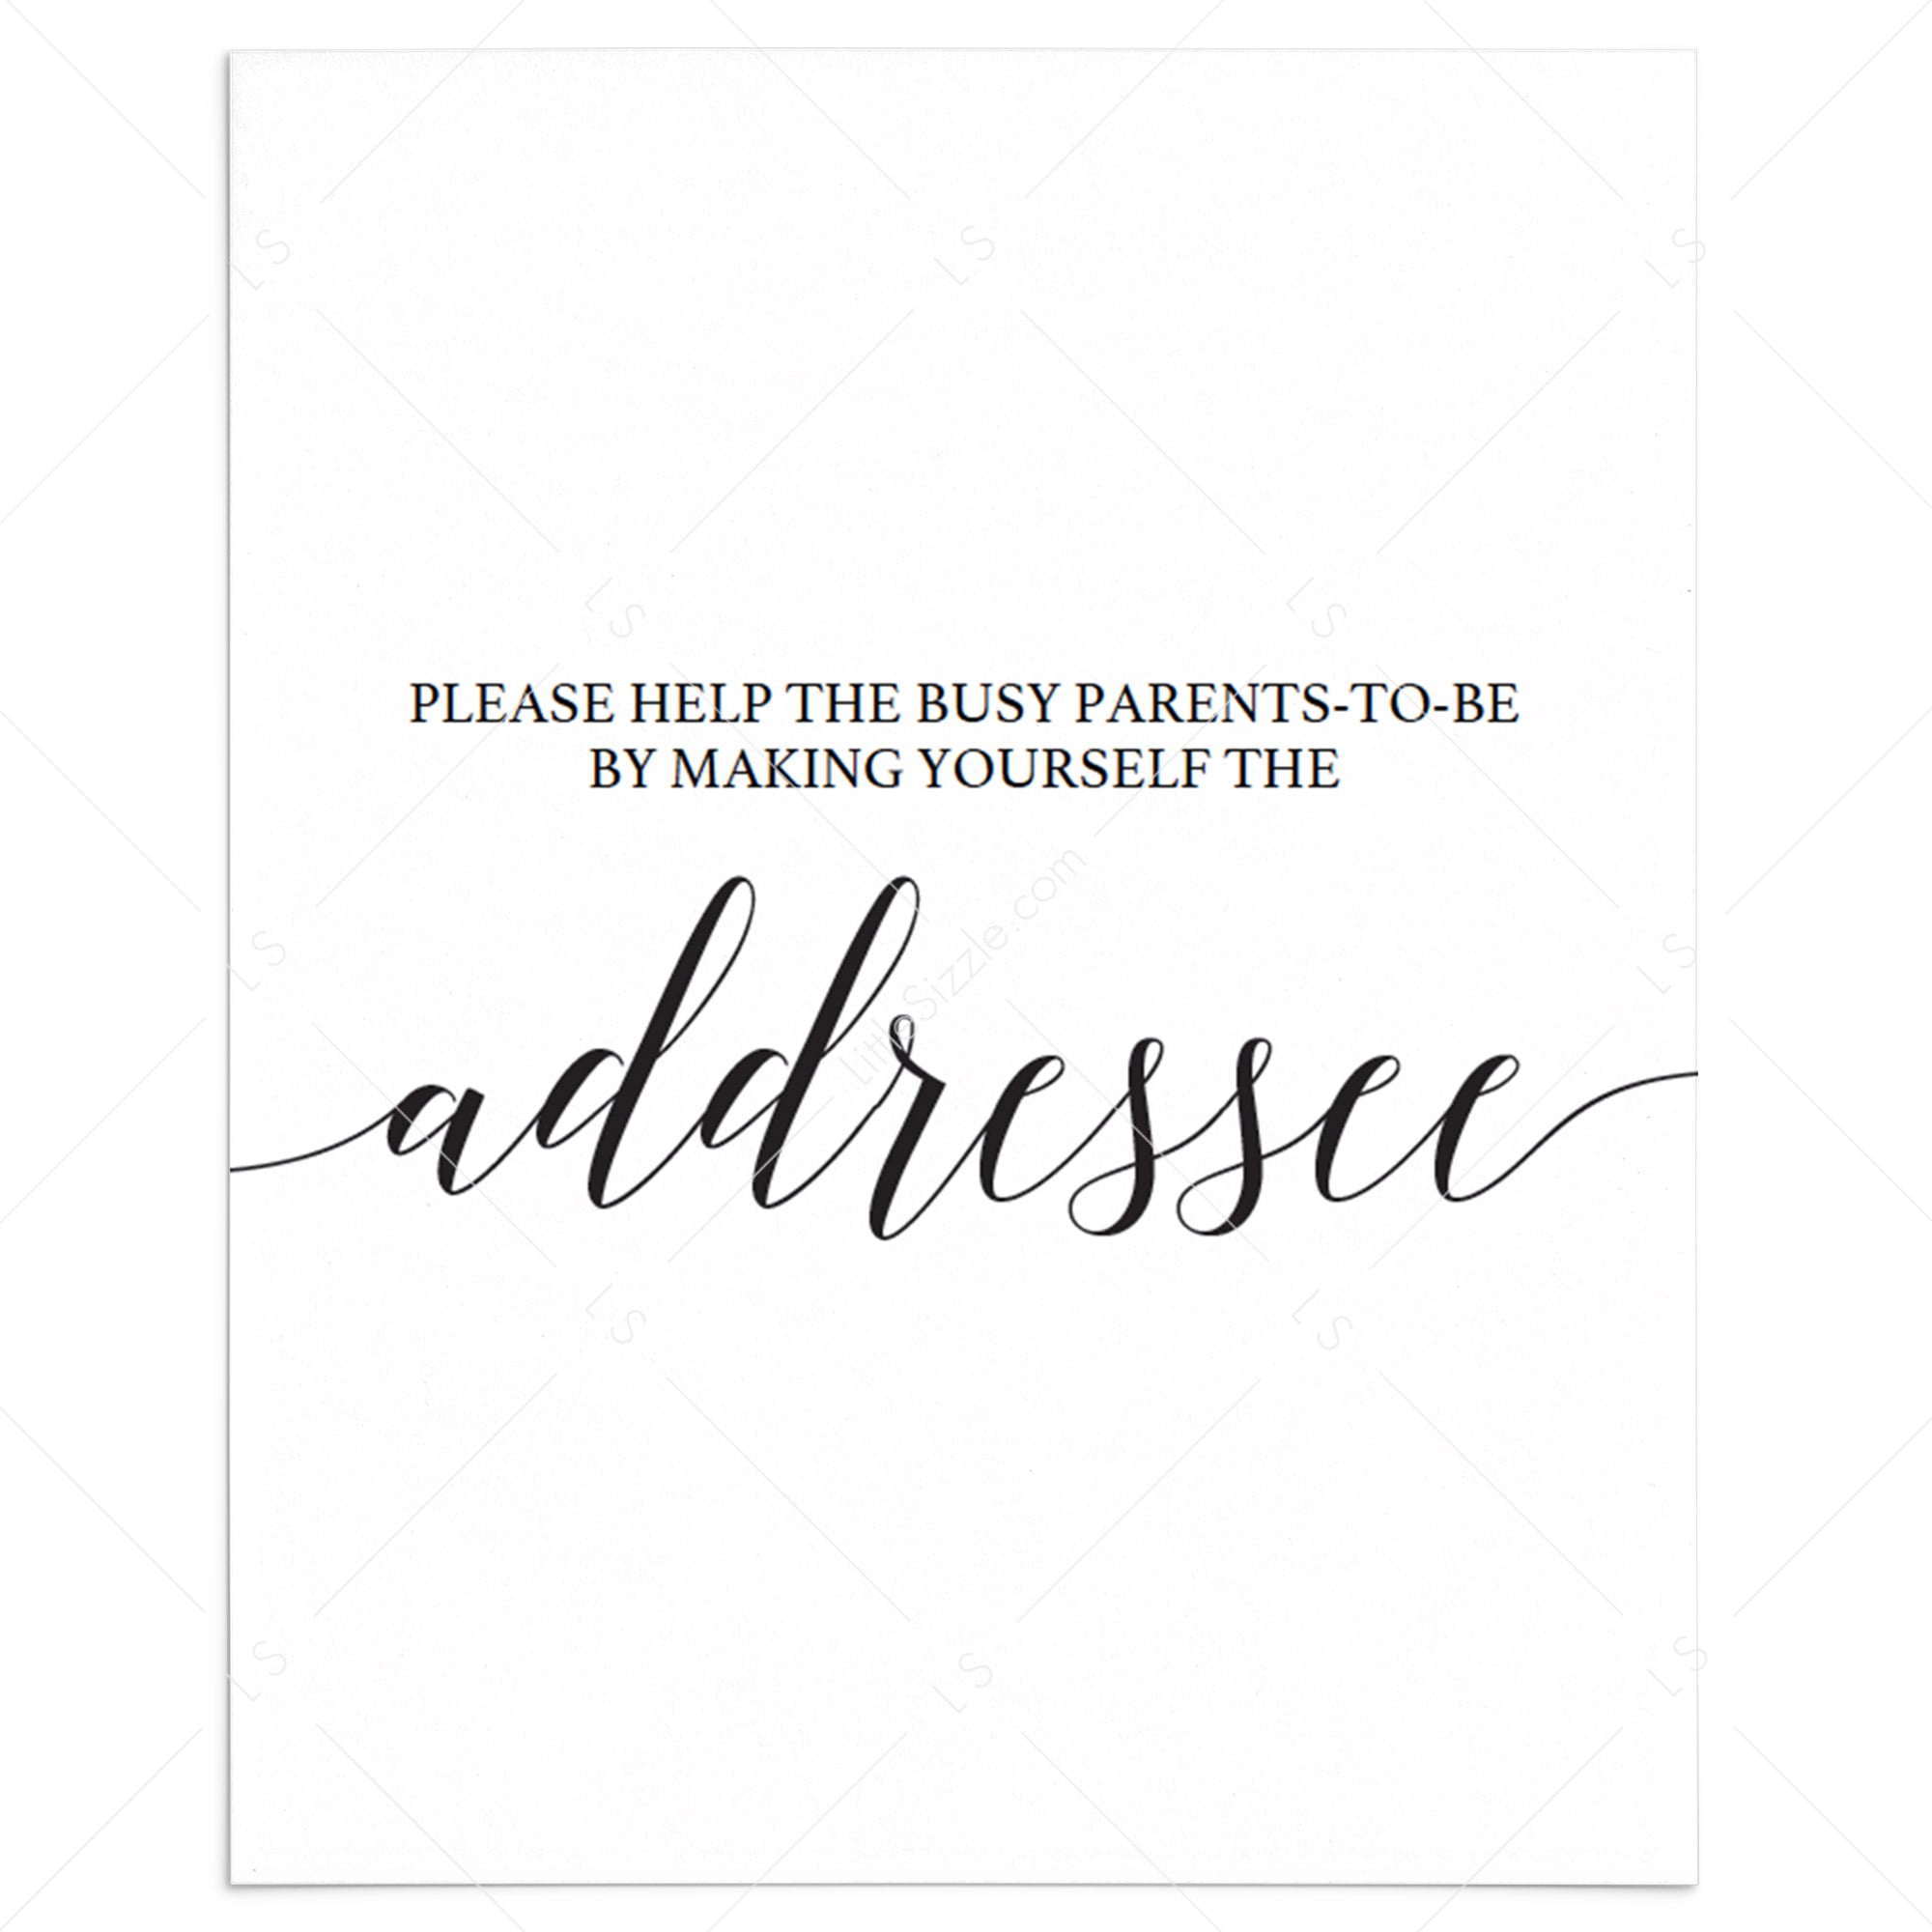 Address request table sign template by LittleSizzle